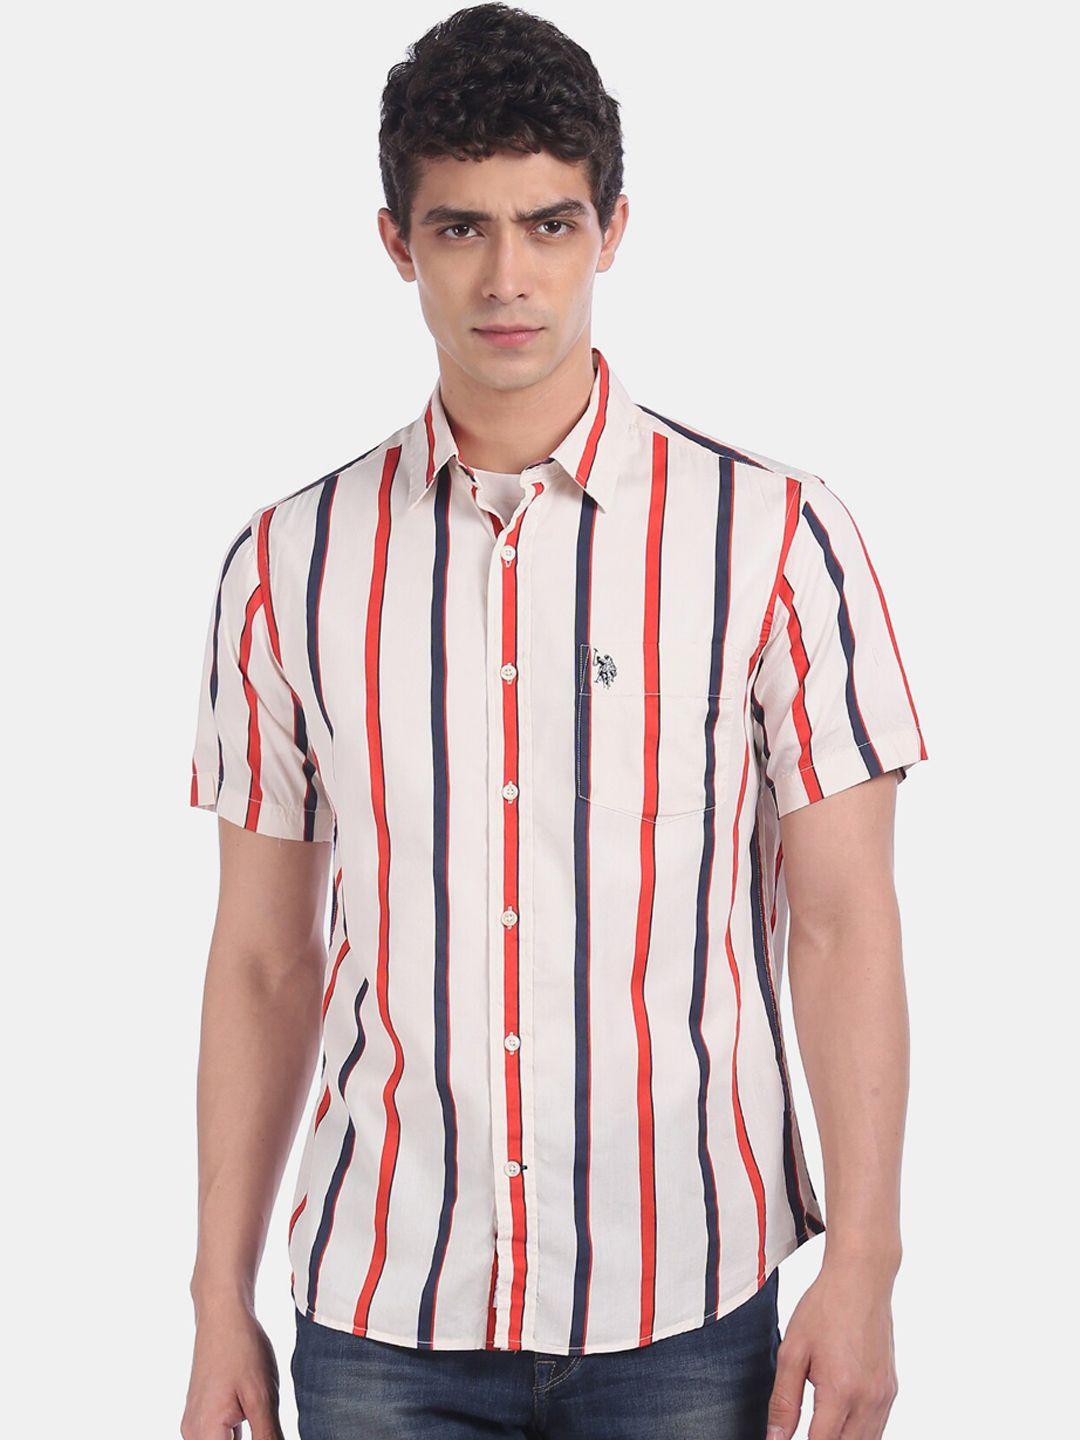 u.s. polo assn. men off-white & red regular fit striped casual shirt